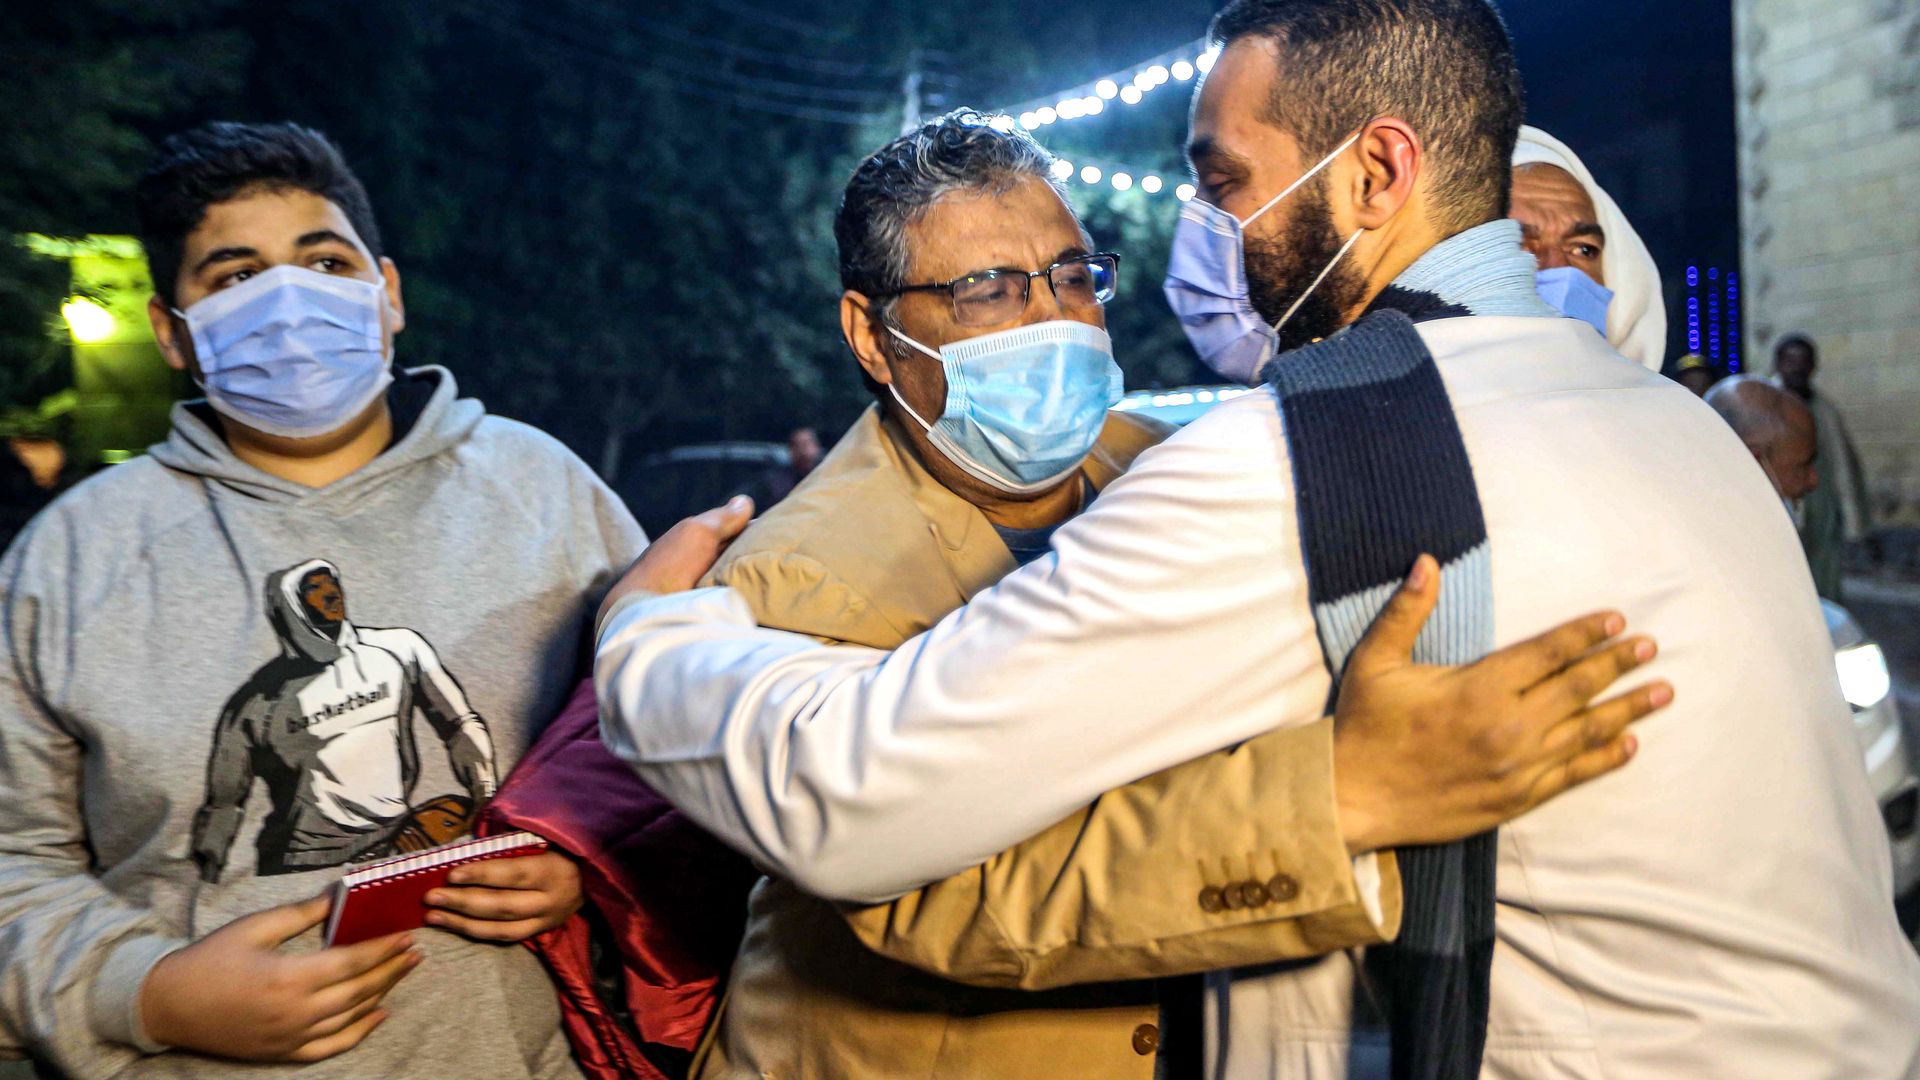 Mahmoud Hussein (C), an Egyptian national and senior journalist for Qatar-based Al Jazeera Arabic, is embraced by a man upon his arrival at his family home in the Giza village of Zawyet Abu Musallam